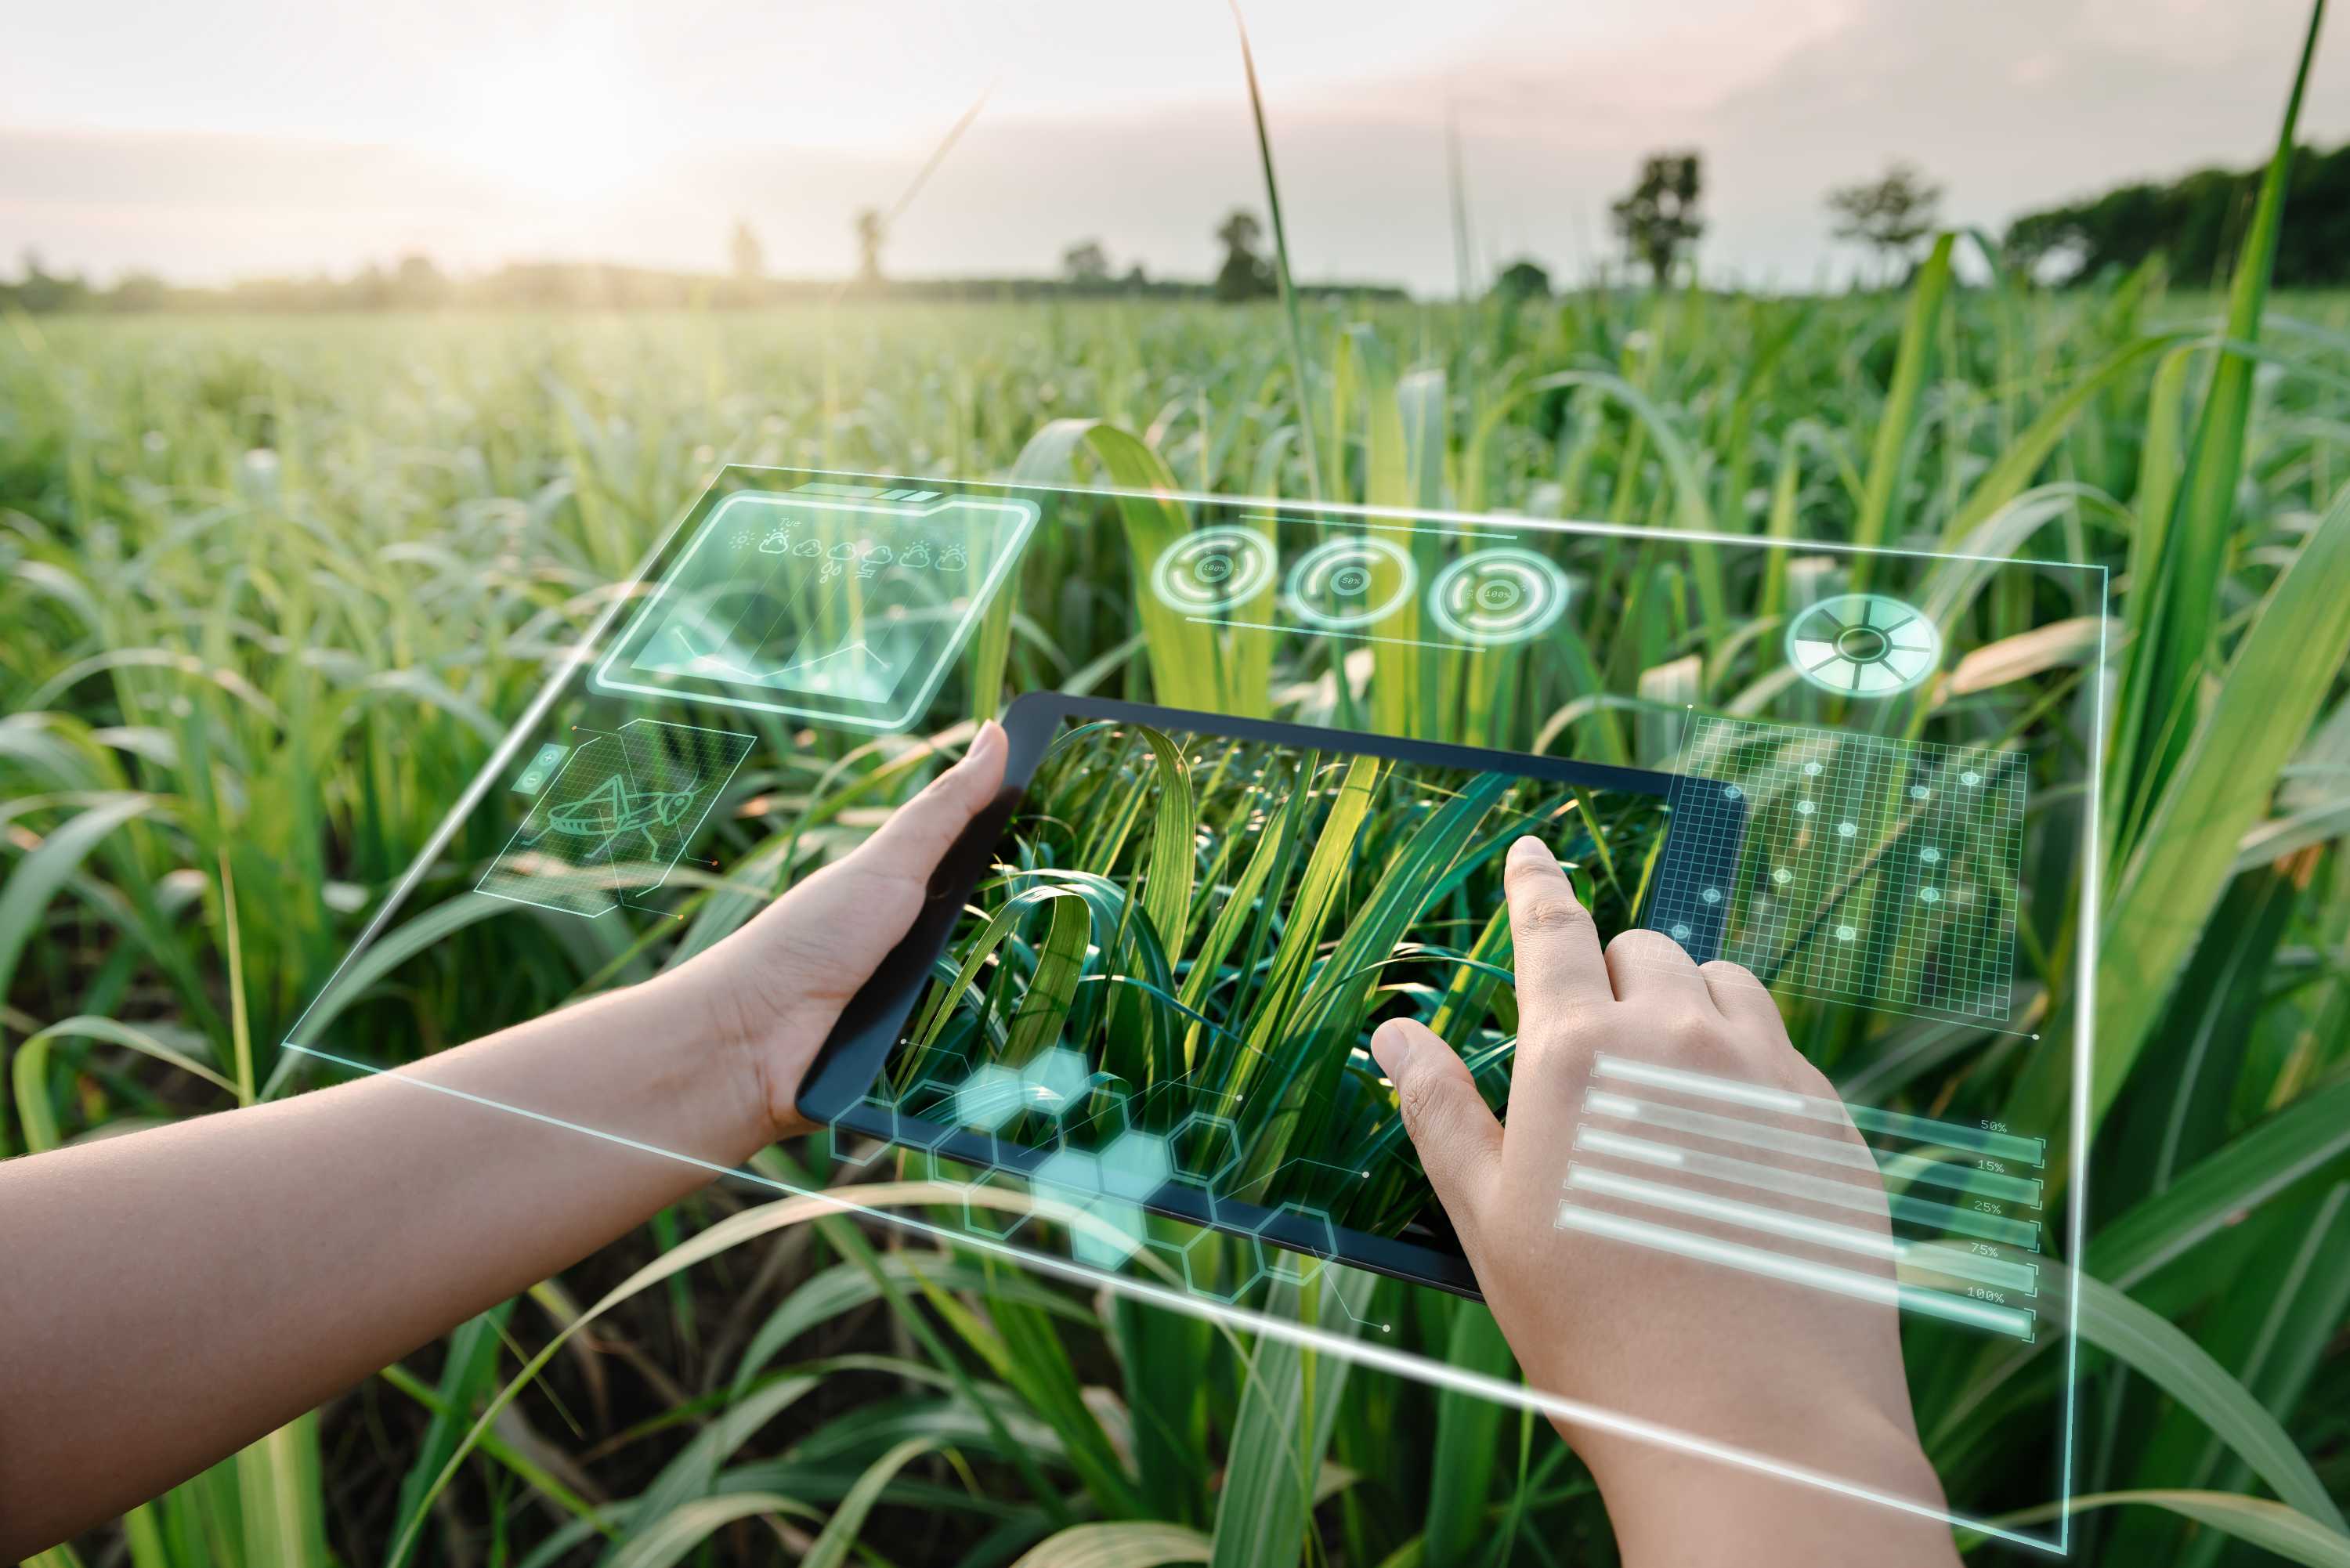 Big data and farming – the promise and the fear